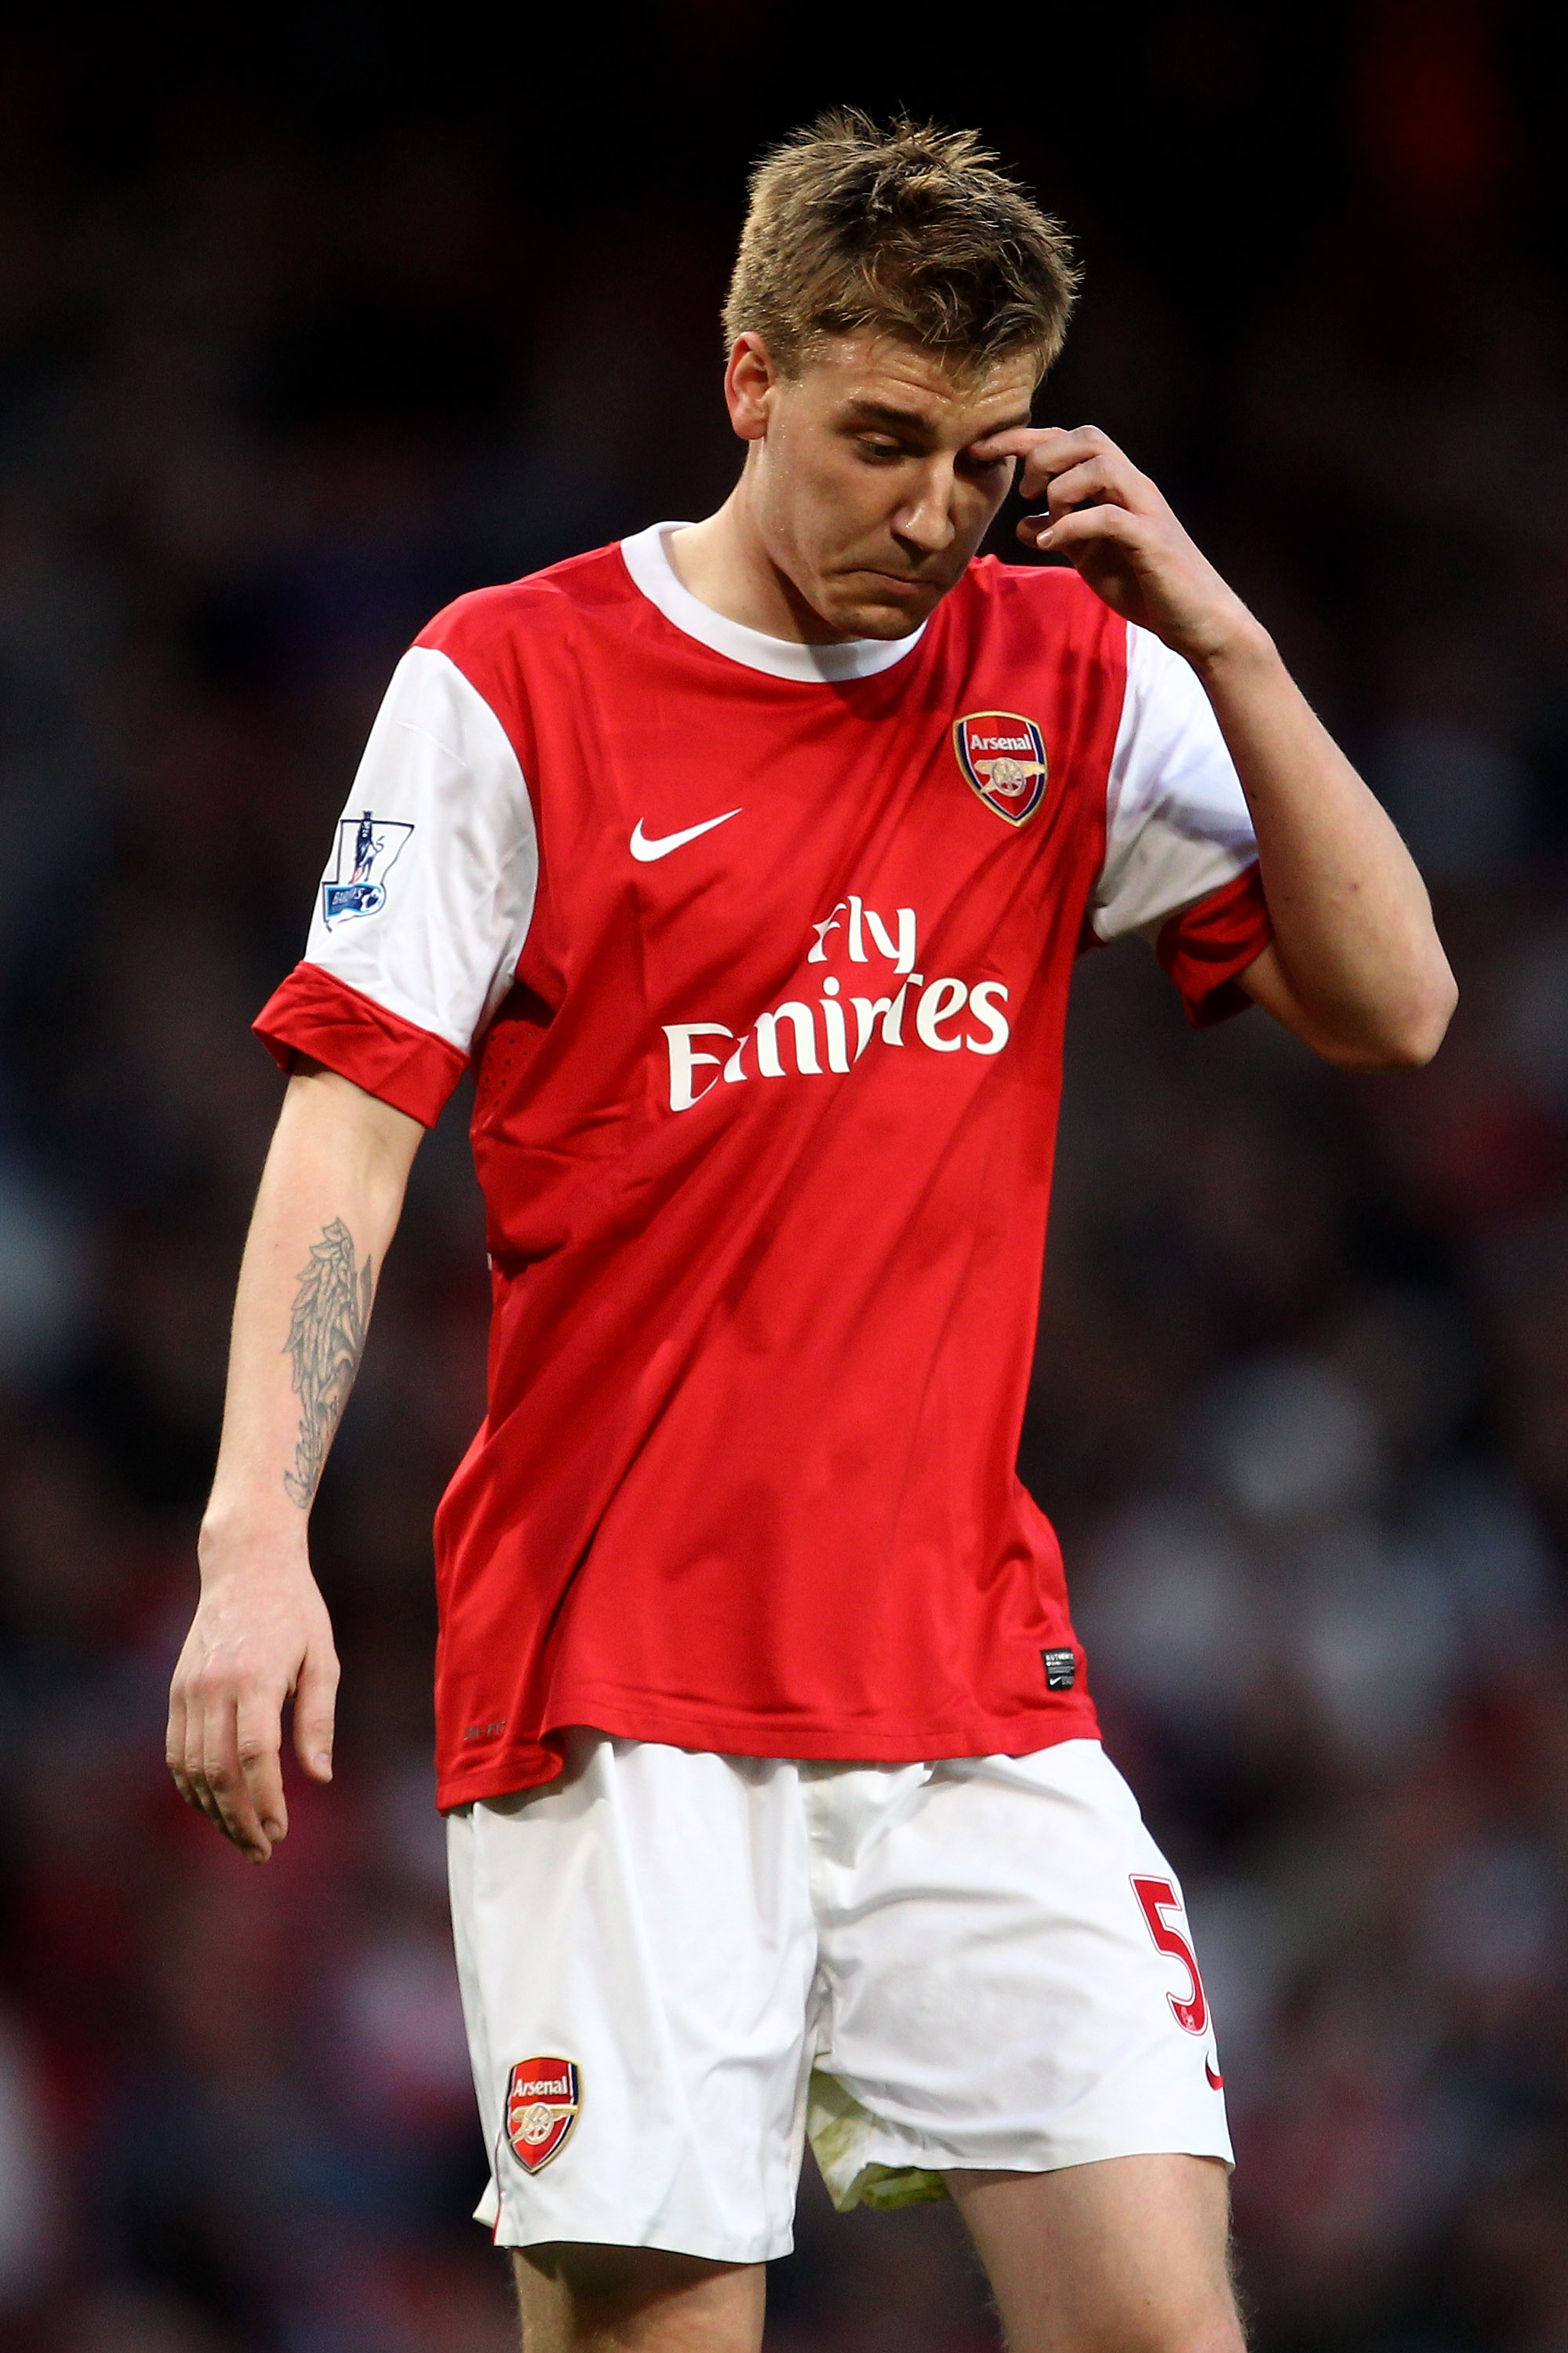 LONDON, ENGLAND - APRIL 02: Nicklas Bendtner of Arsenal looks dejected during the Barclays Premier League match between Arsenal and Blackburn Rovers at the Emirates Stadium on April 2, 2011 in London, England.  (Photo by Julian Finney/Getty Images)